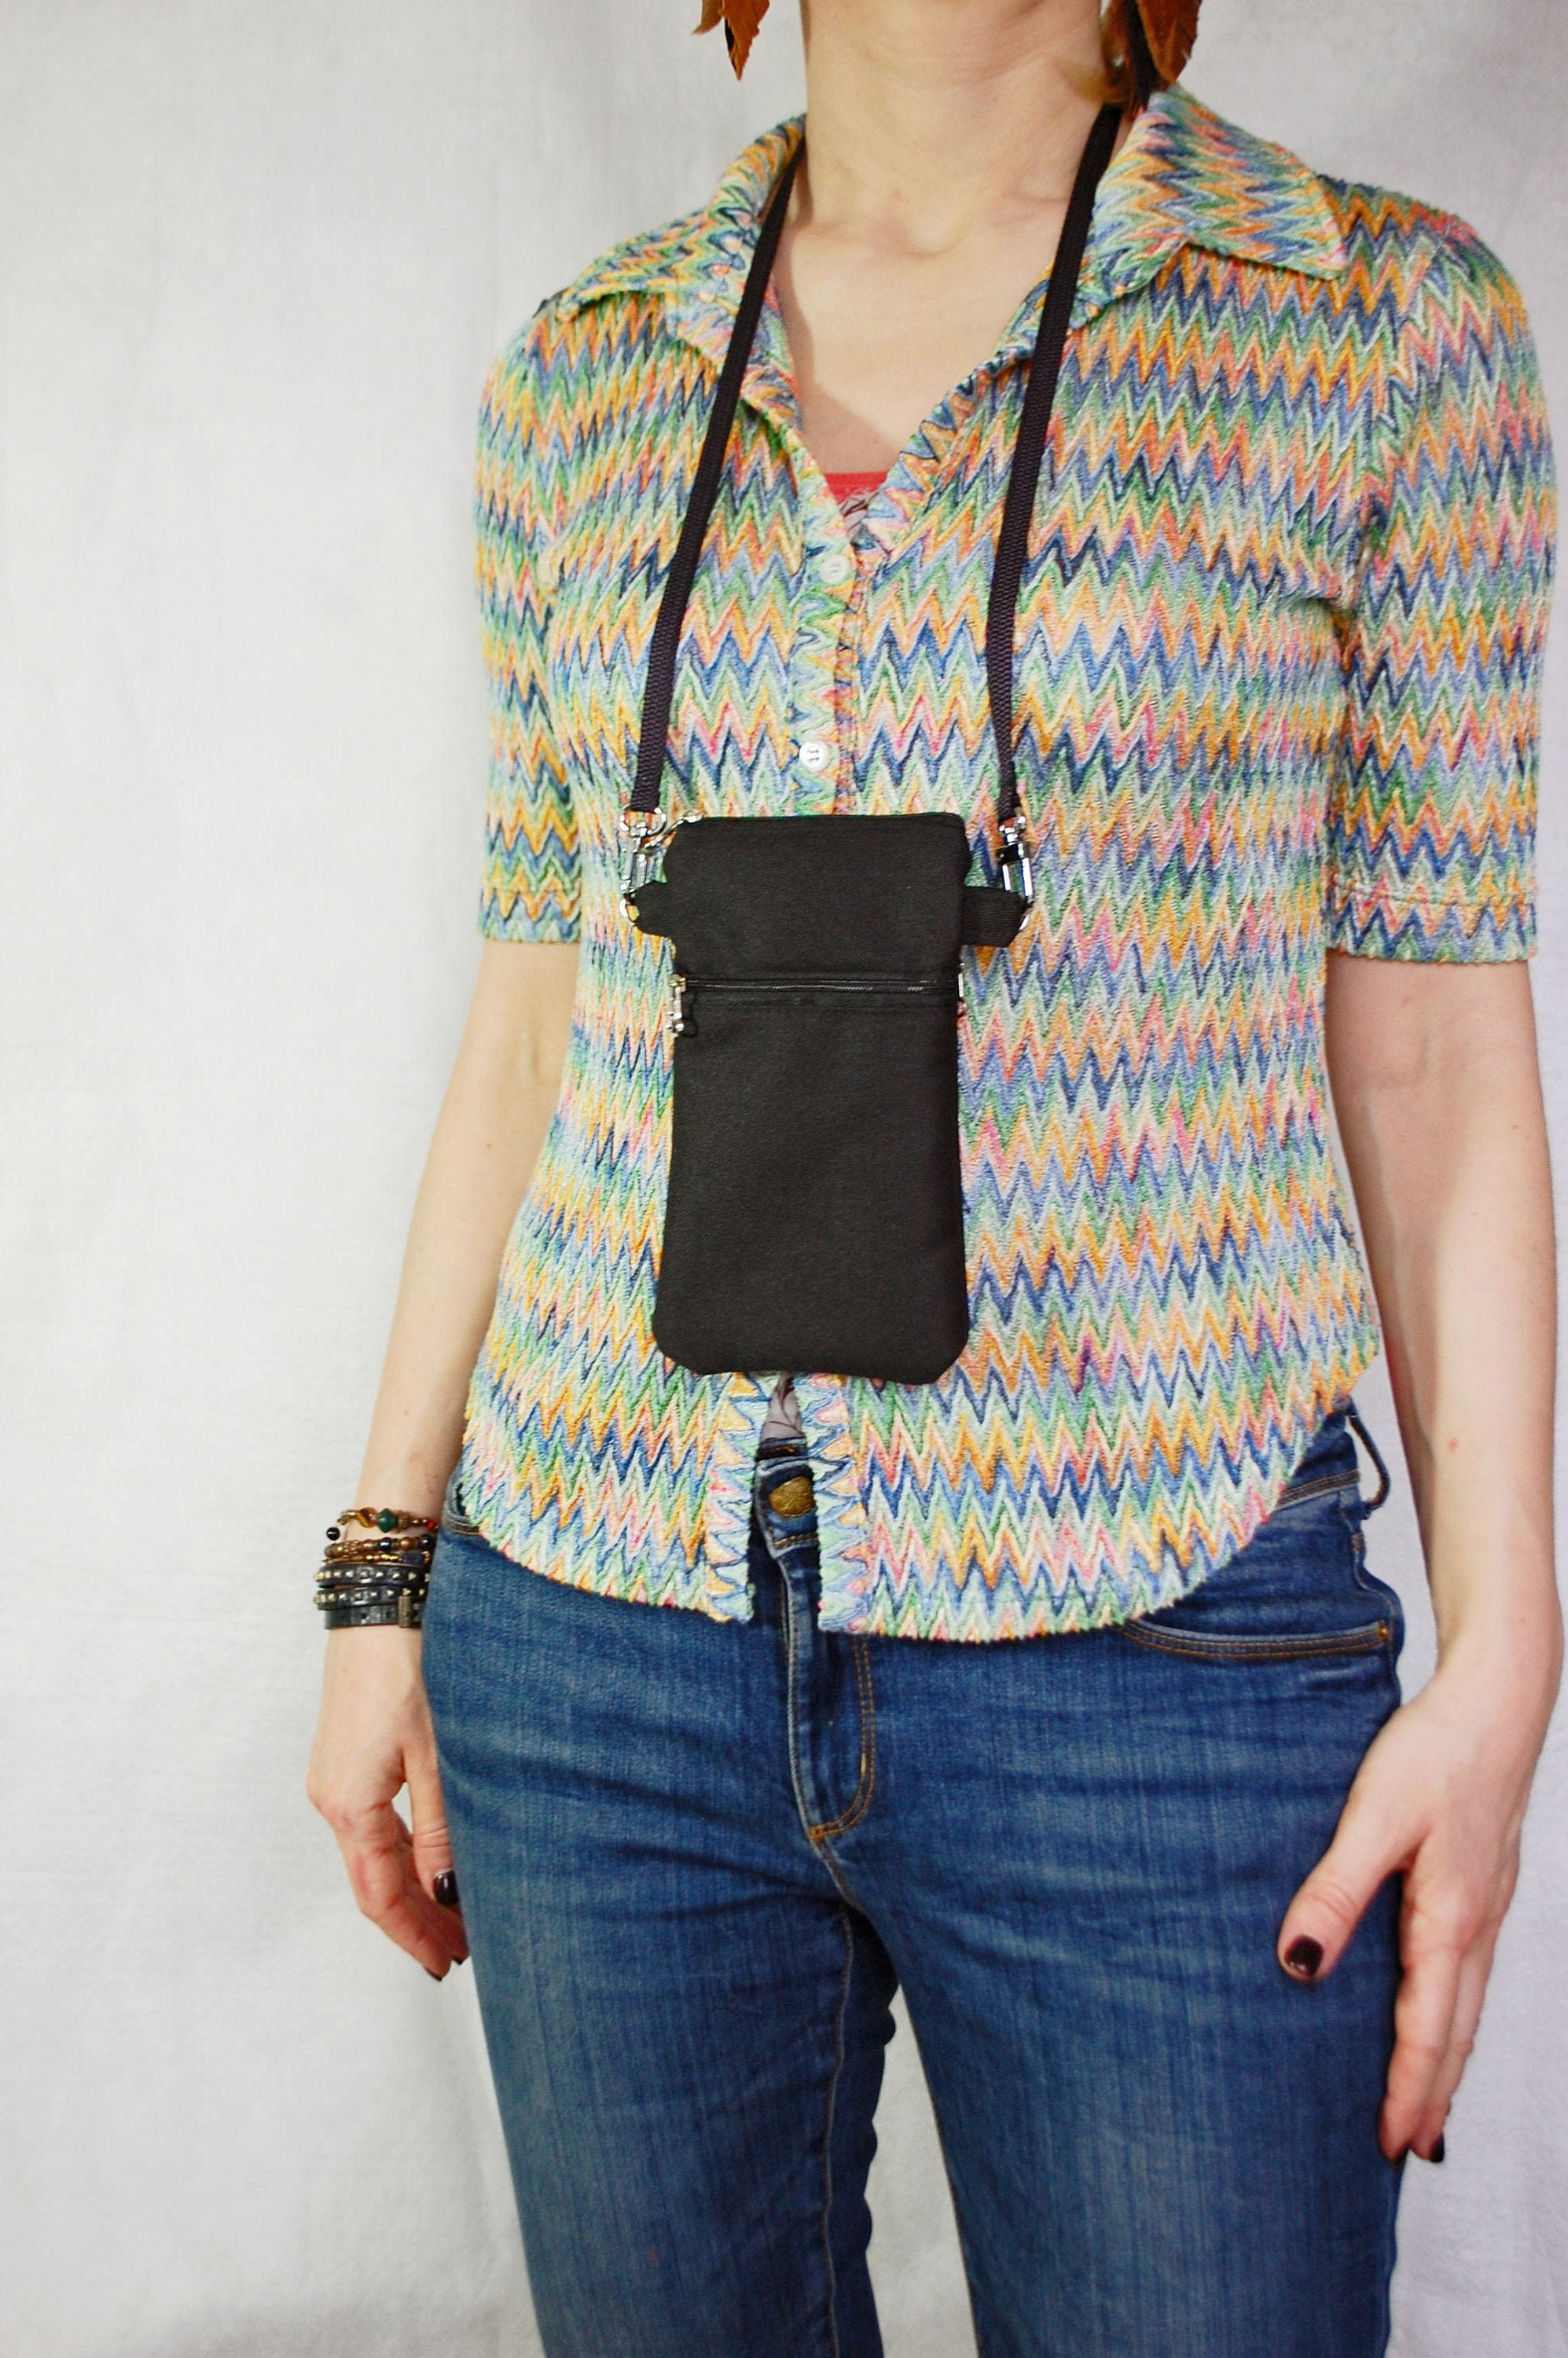 Mobile Phone Pouch sewing pattern - Sew Modern Bags